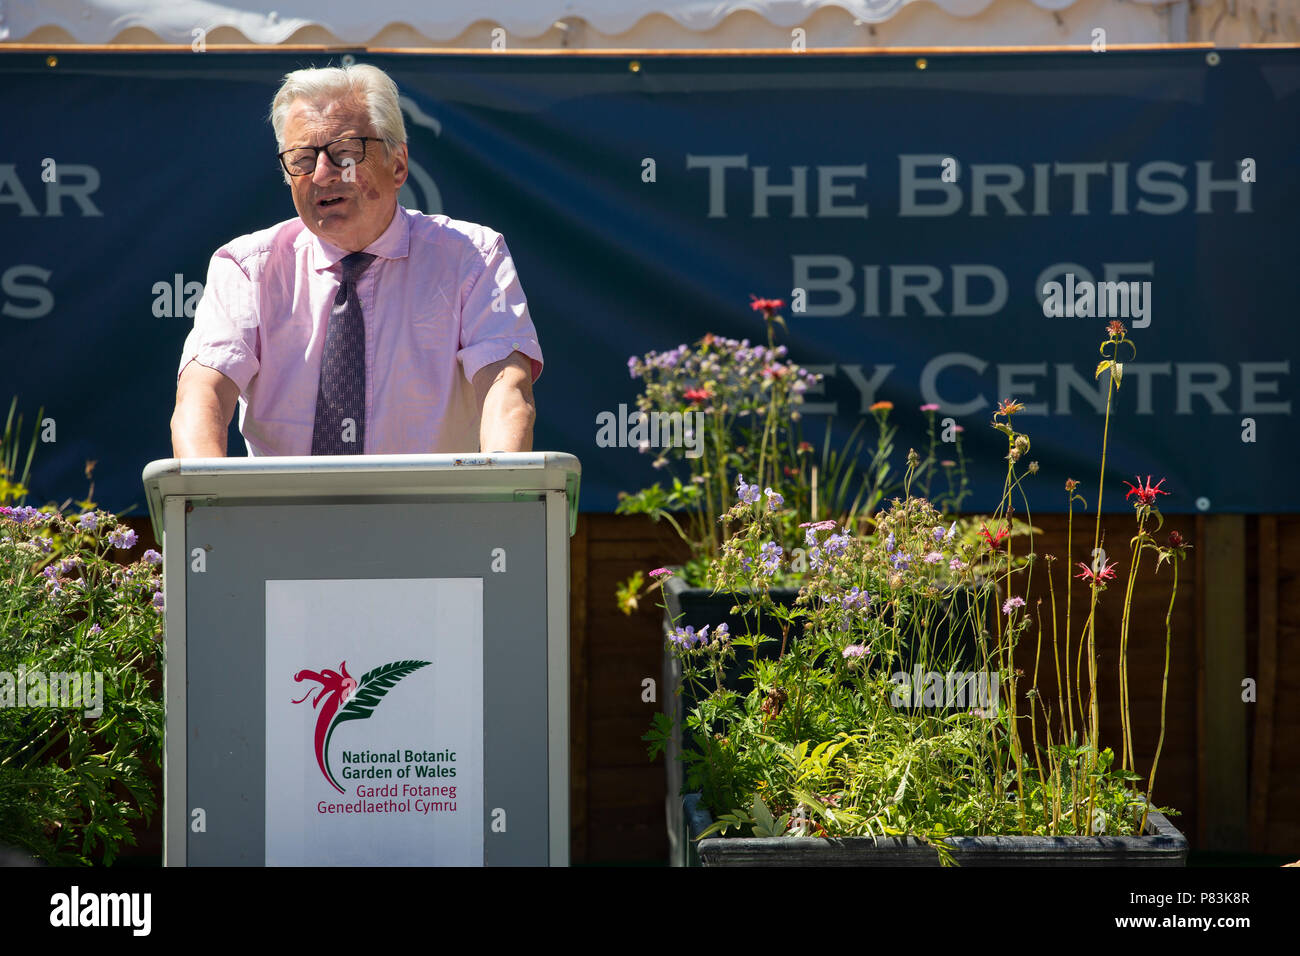 Lord Dafydd Elis-Thomas AM, Welsh Government Minister for Culture, Tourism and Sport speaks at the Official Opening of British Bird of Prey Centre. Stock Photo